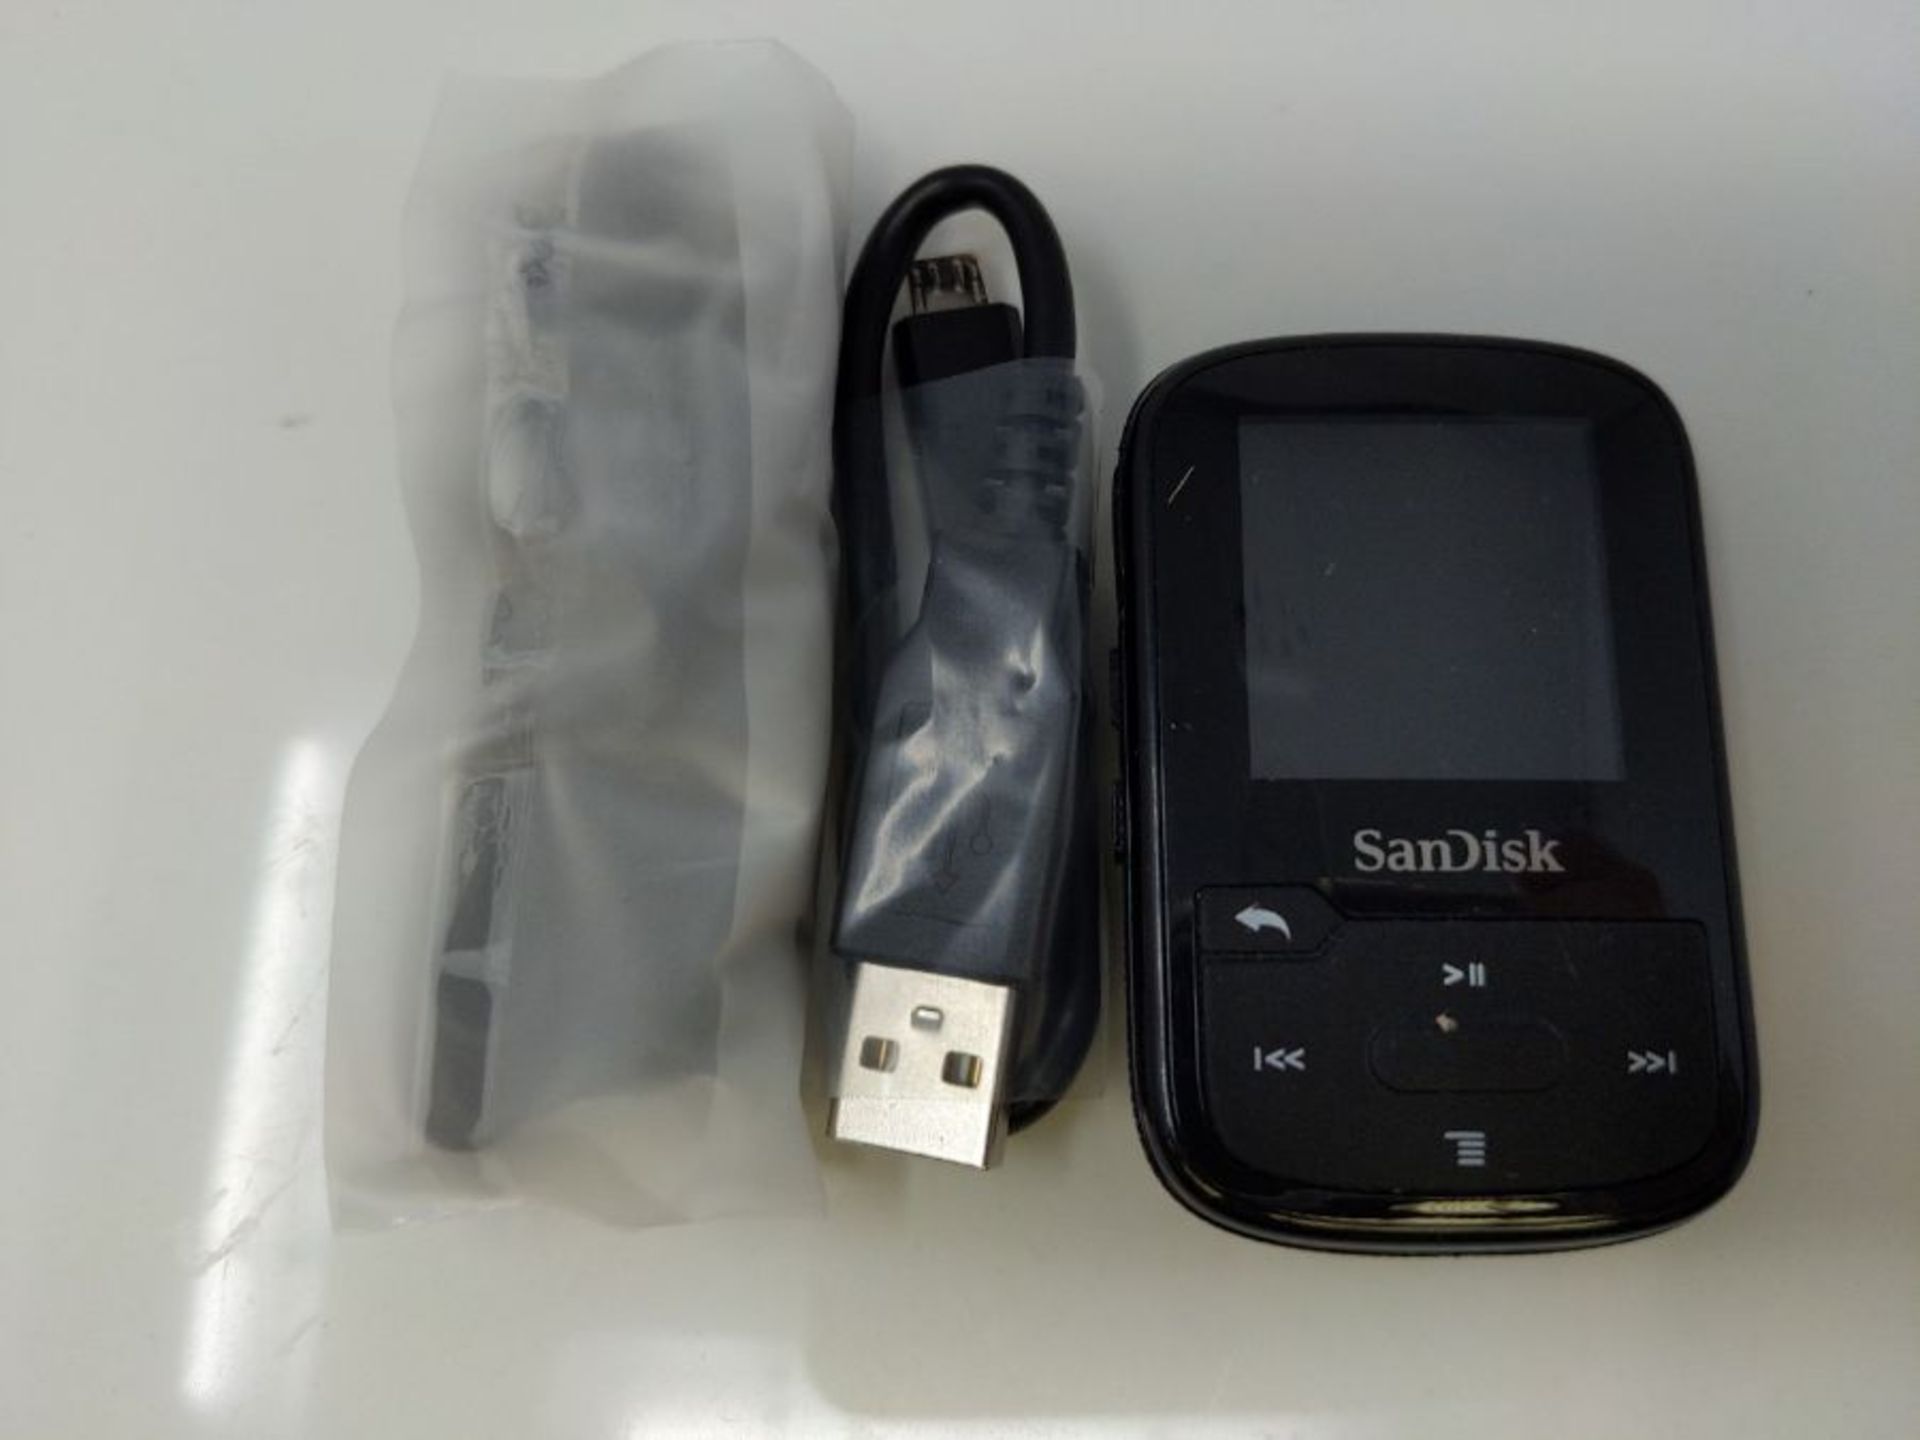 SanDisk Clip Sport Plus 32GB Wearable, Bluetooth MP3 Player - Black - Image 3 of 3